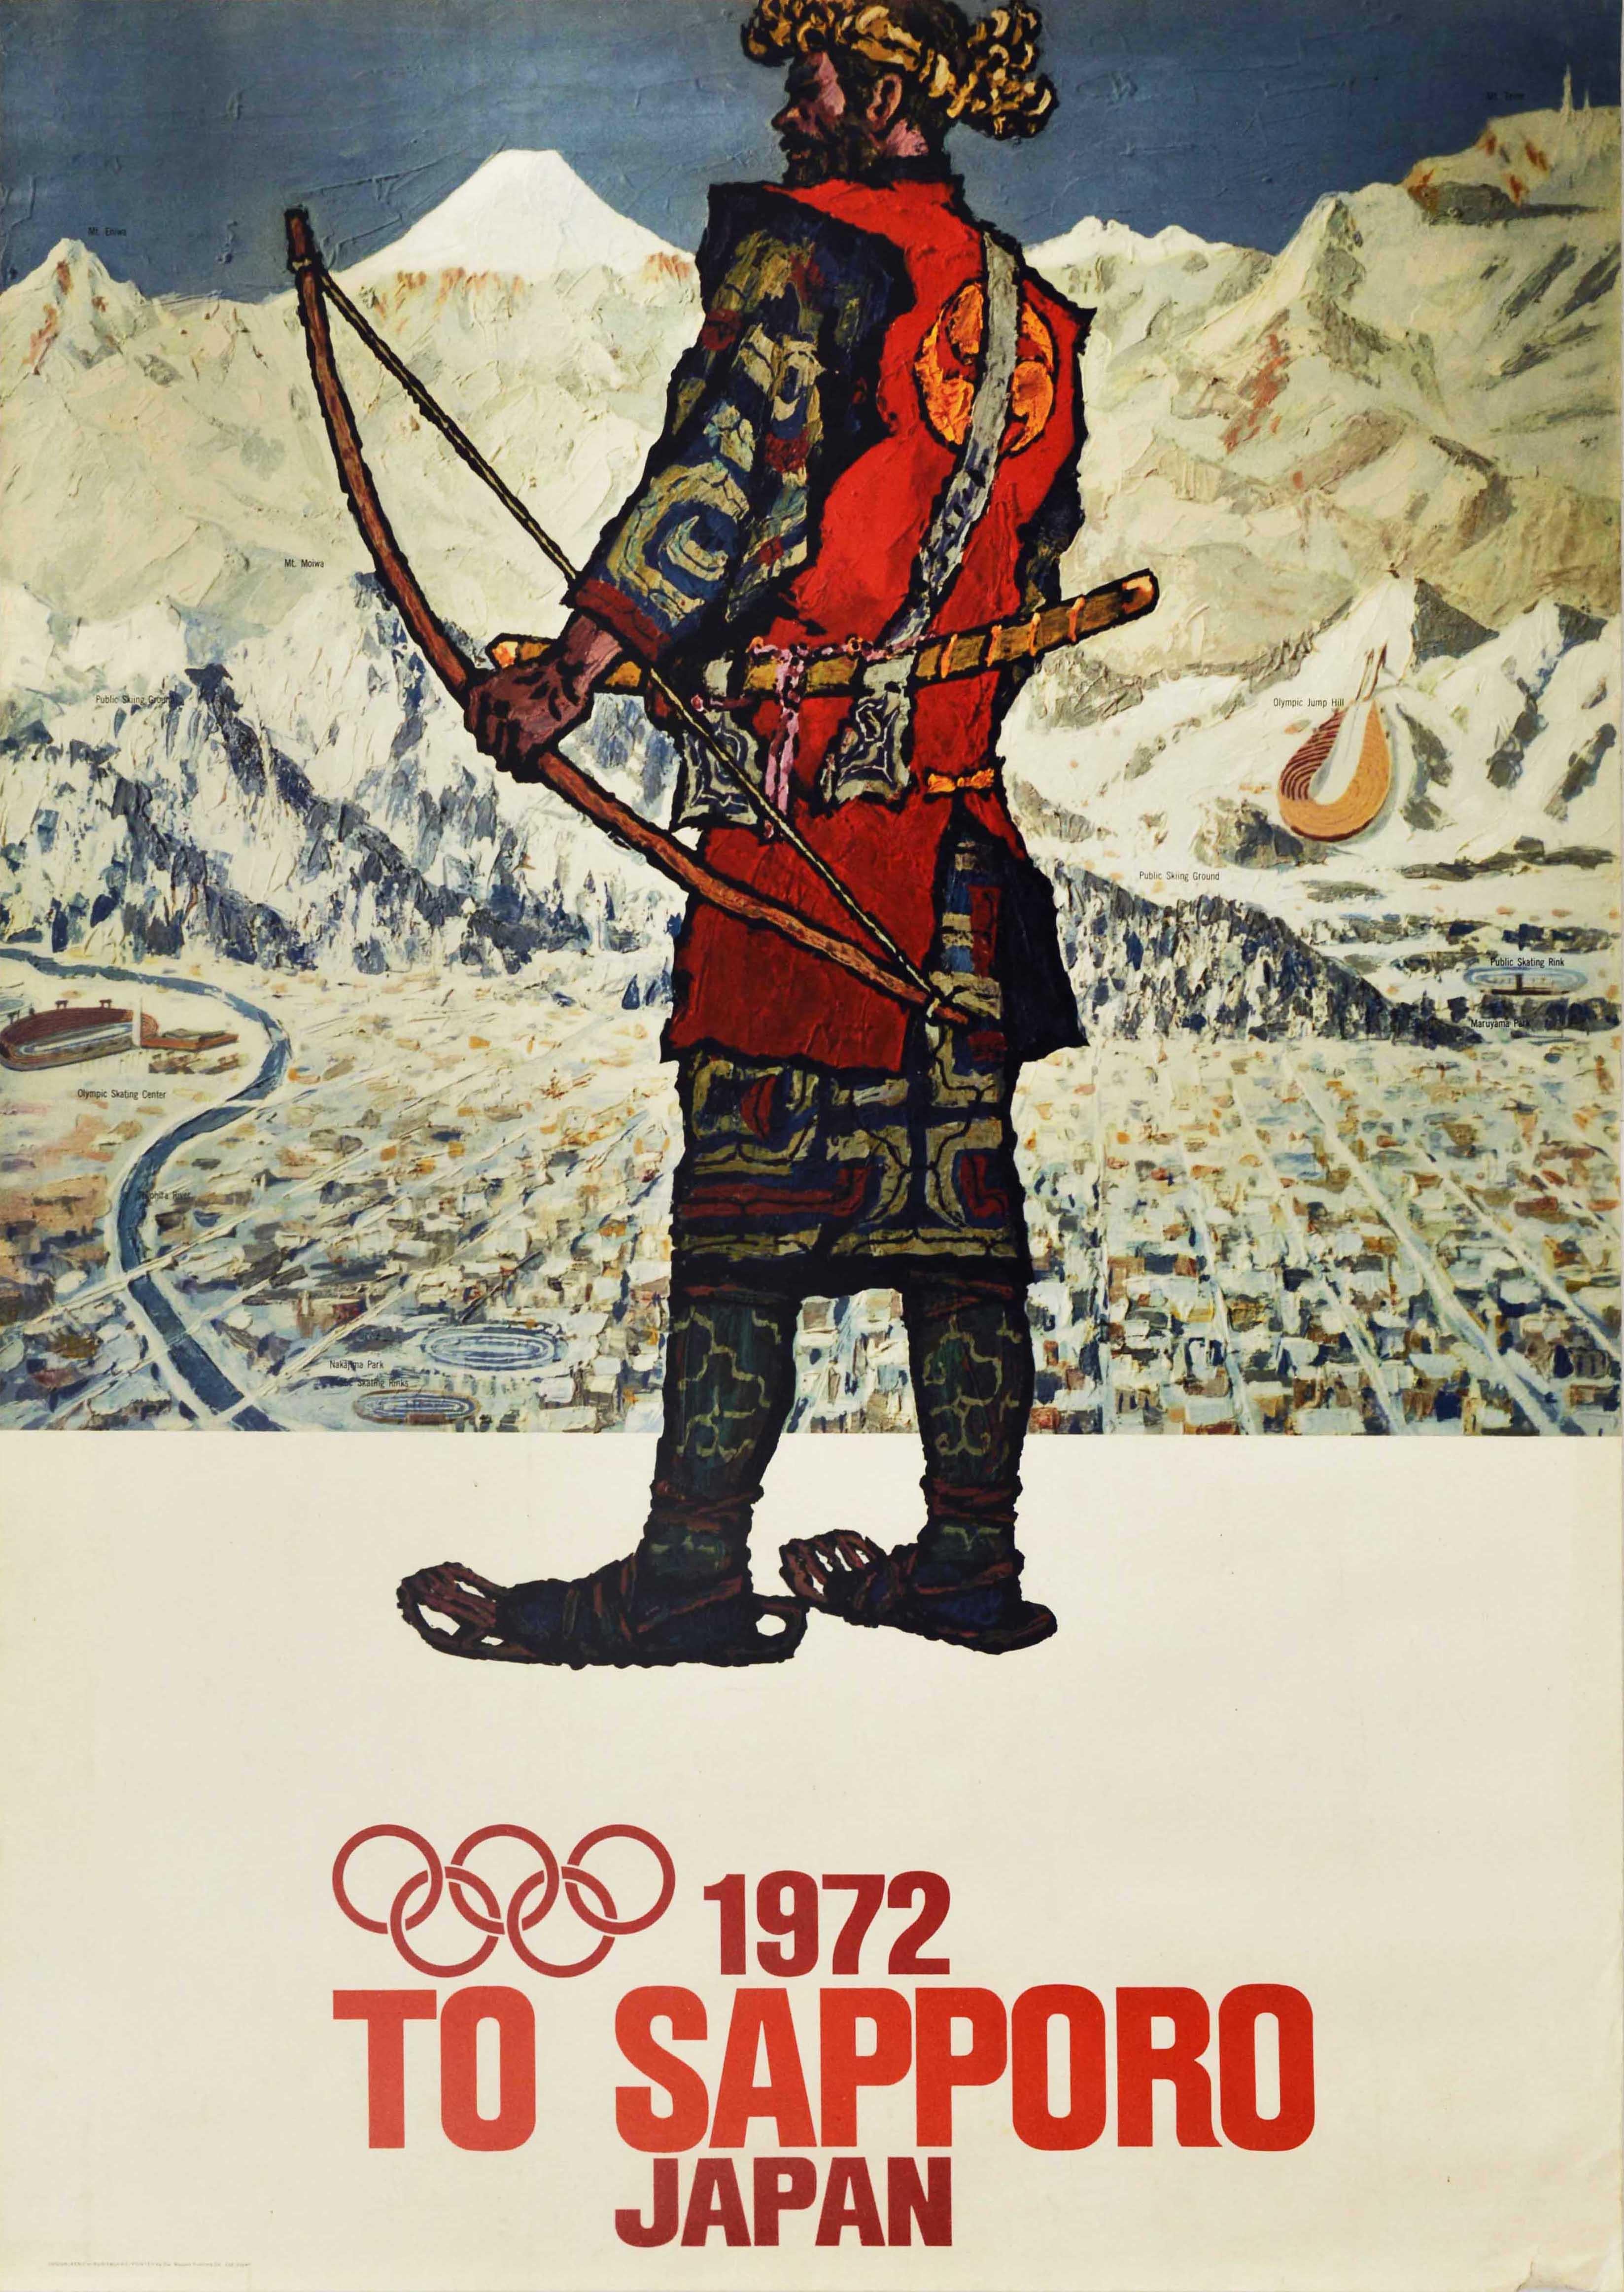 Unknown Print - Original Vintage Poster To Sapporo Japan 1972 Winter Olympic Games Warrior Art